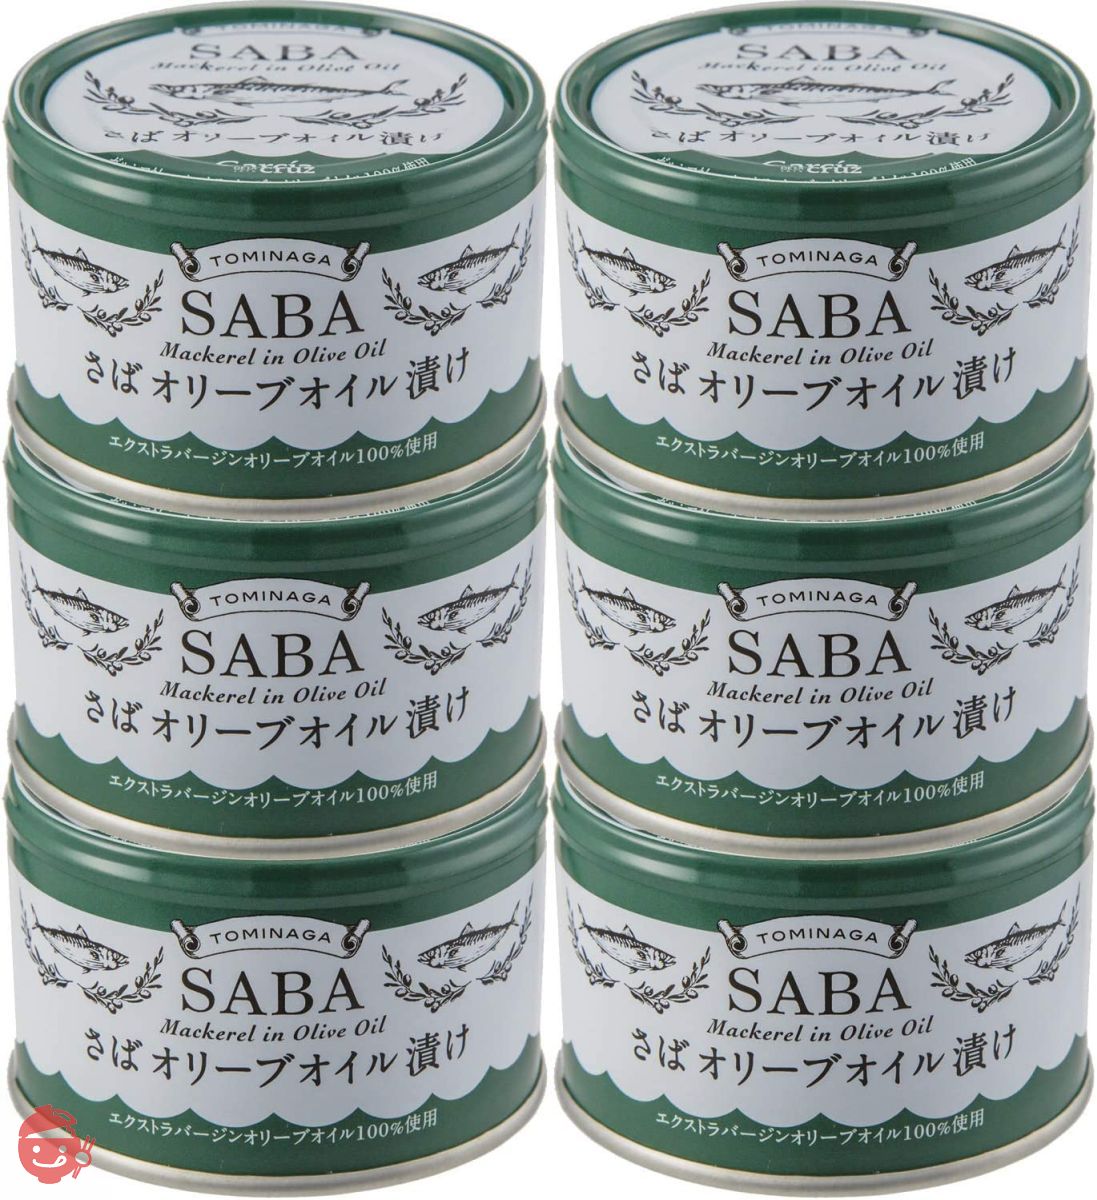 TOMINAGA SABA Olive Oil Pickled Plain Canned 150g x 6 [Canned